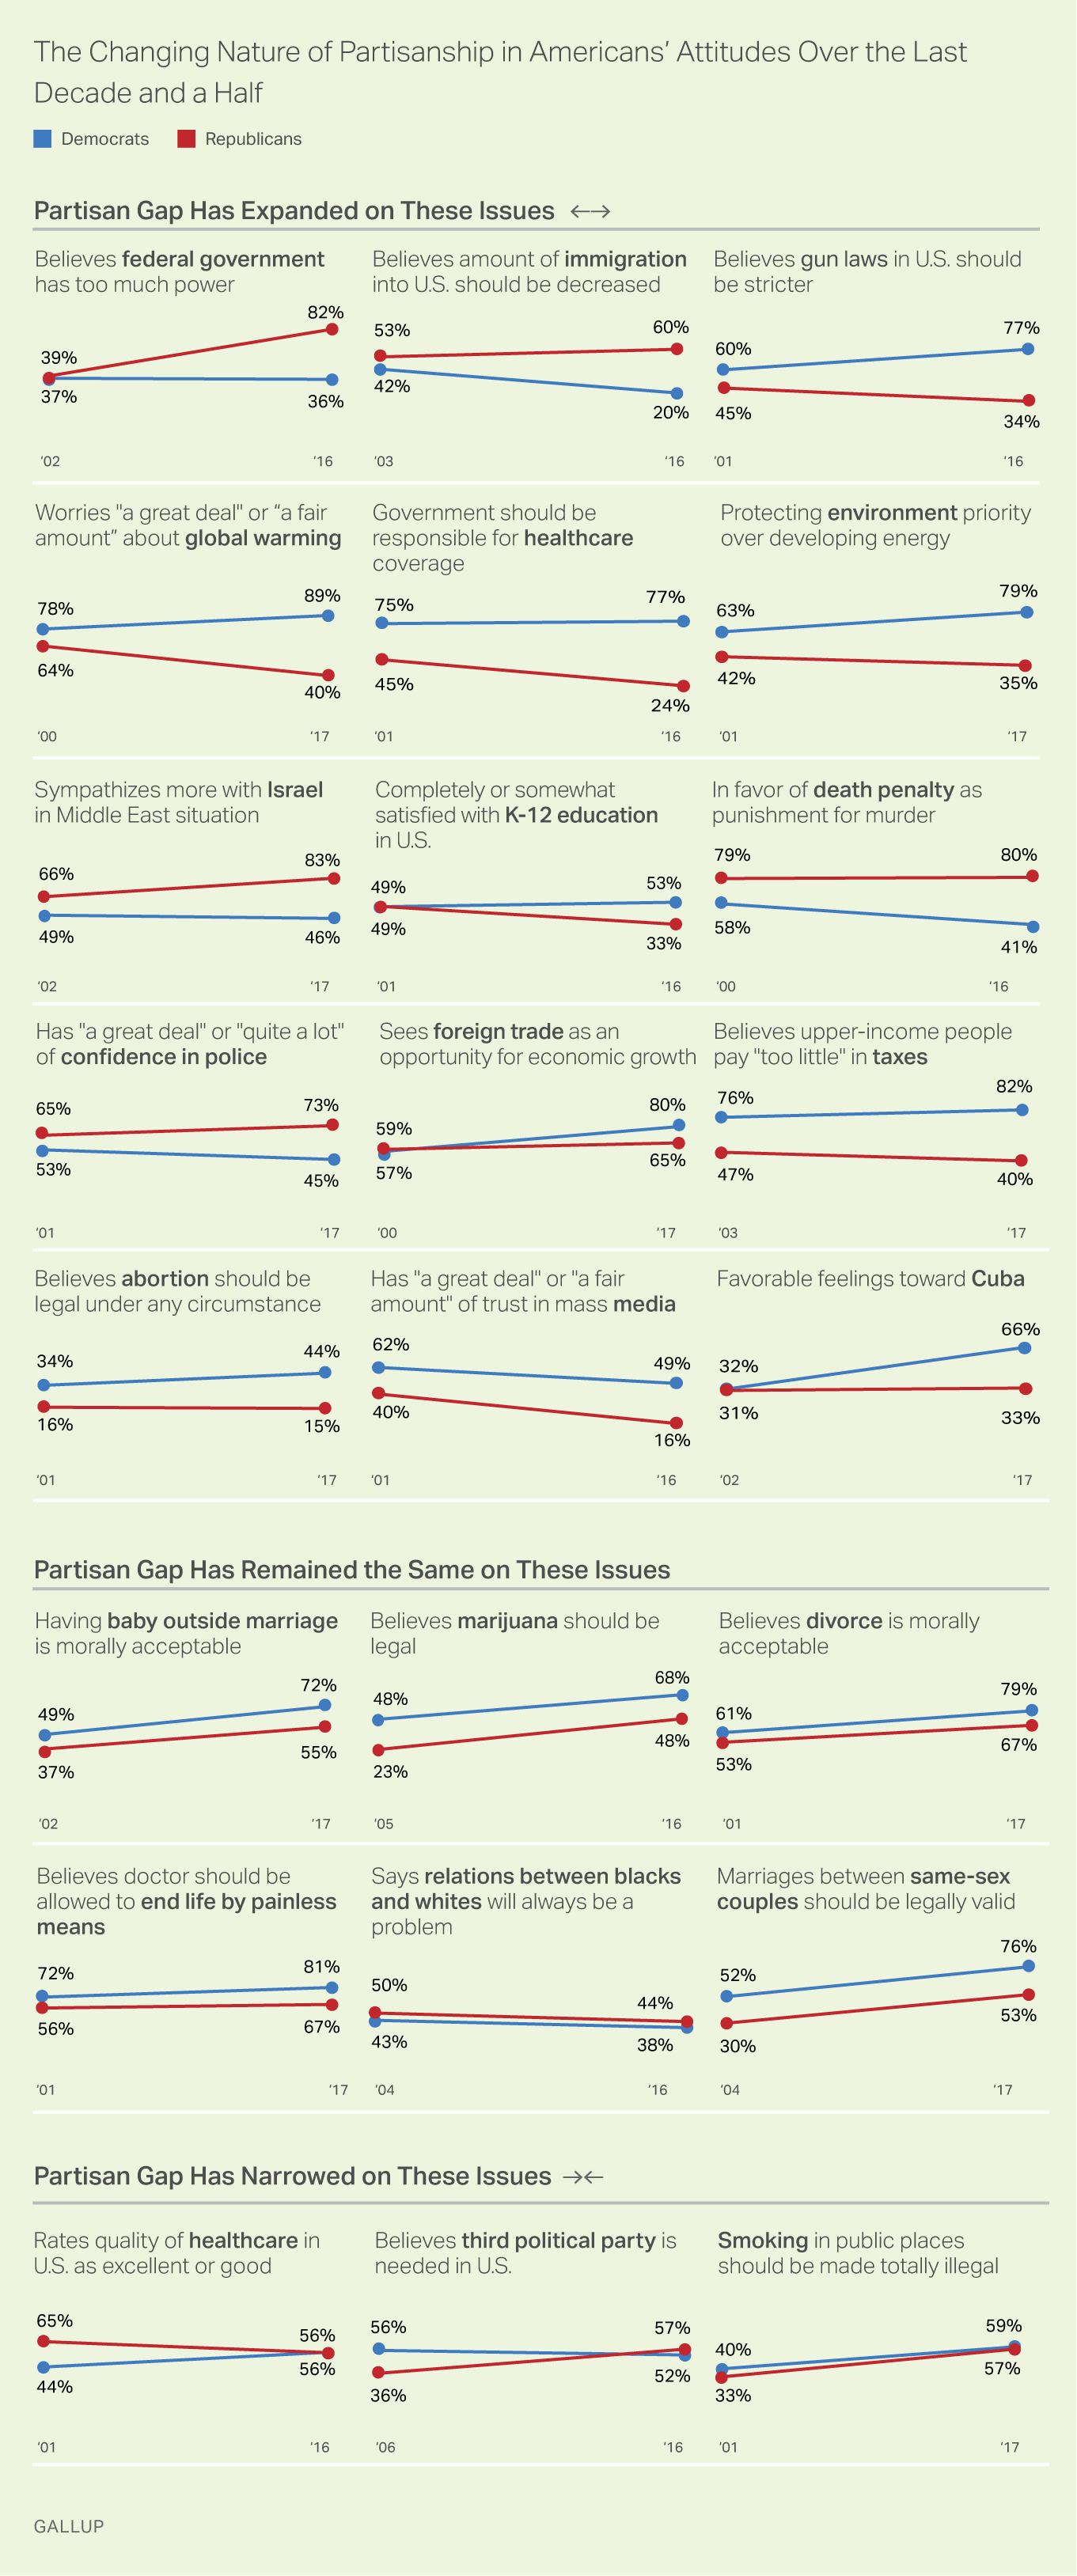 Charts Showing Partisan Gap on Issues